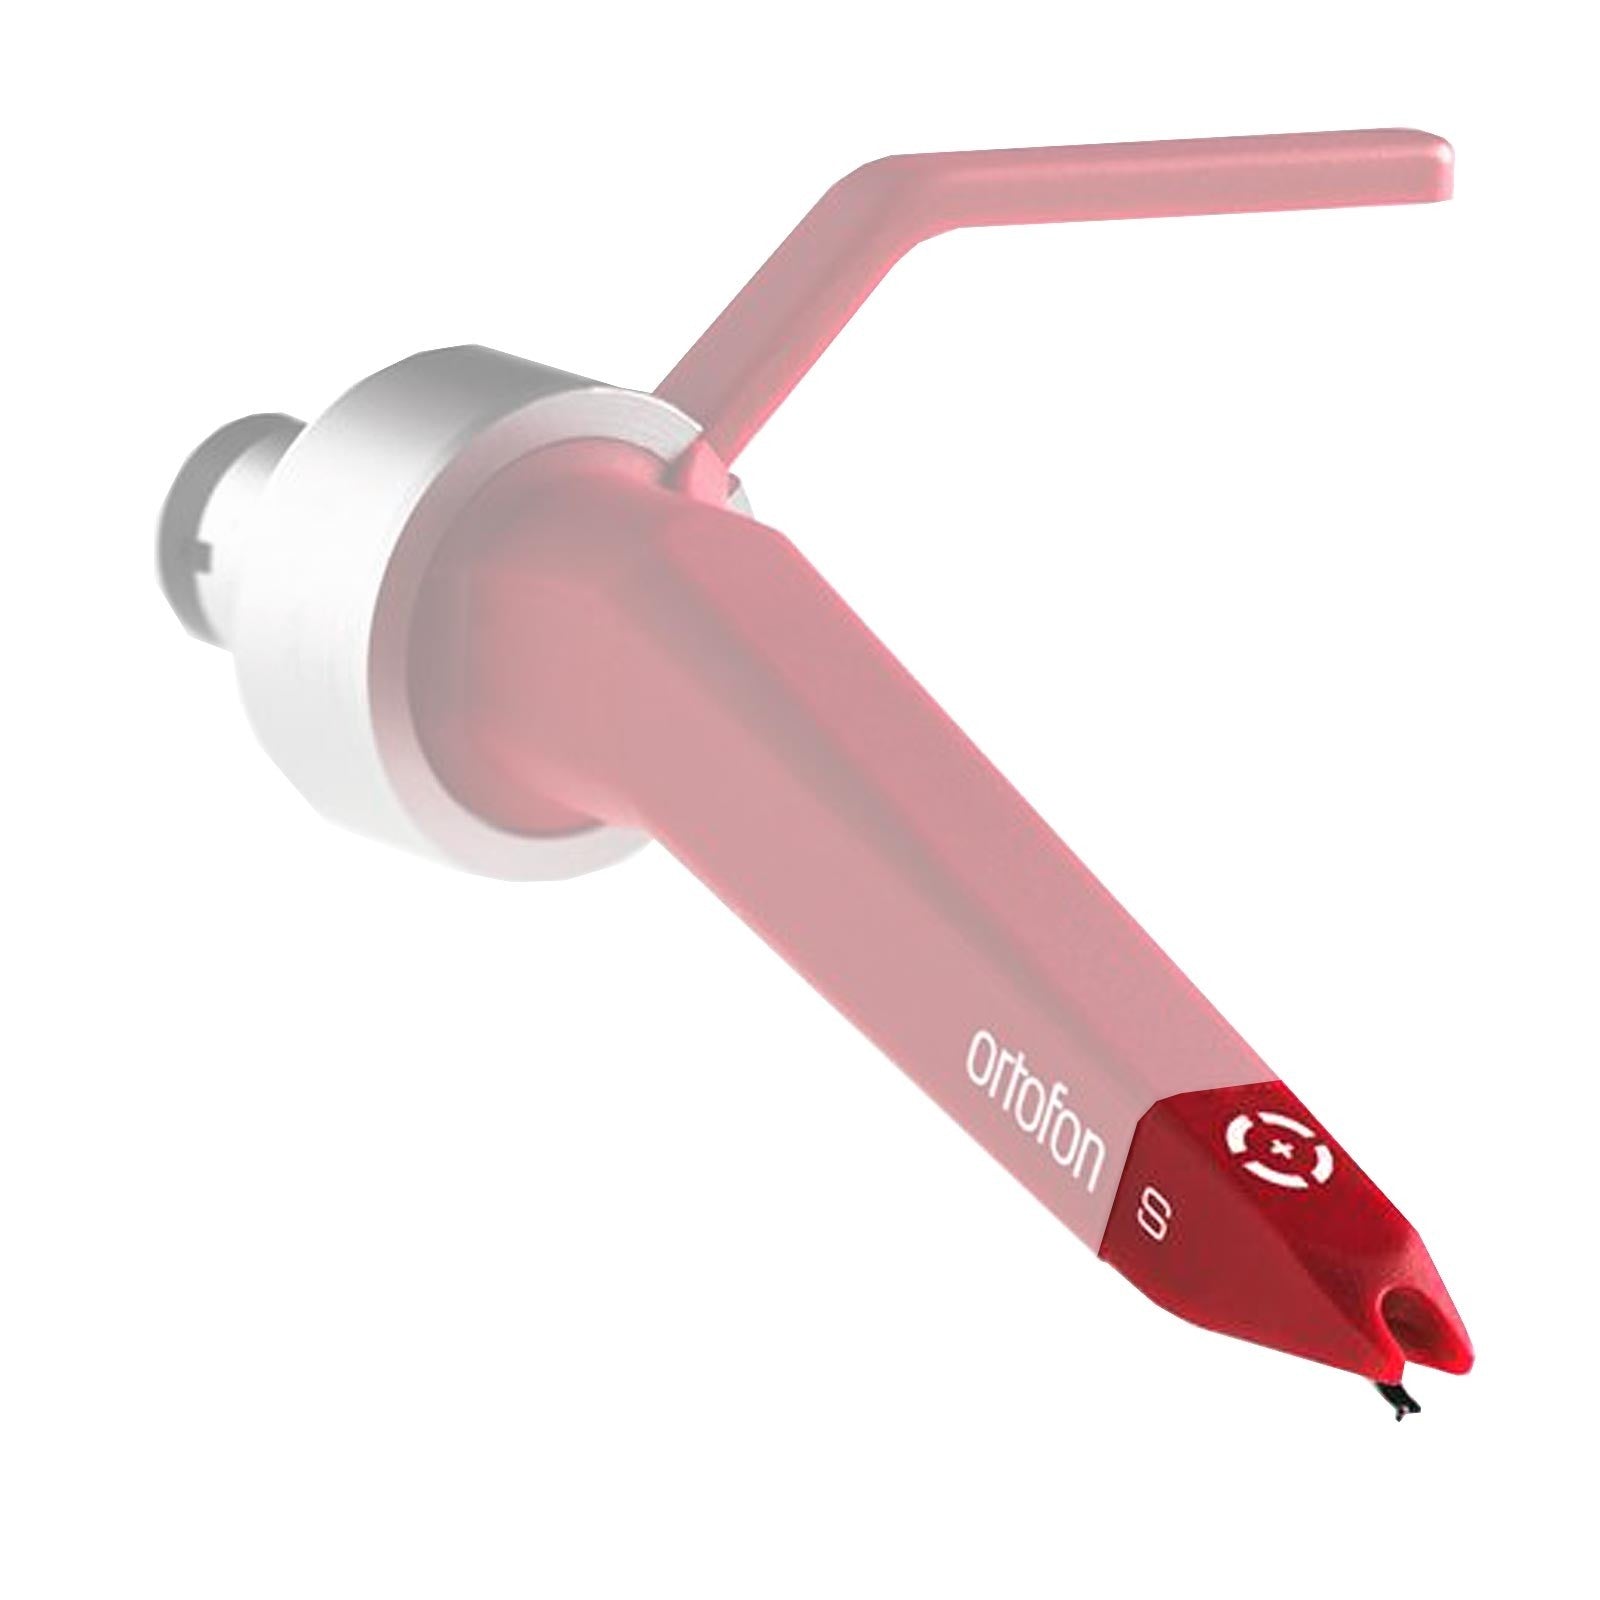 Ortofon DigiTrack Replacement Stylus - Red (Open Box) - Hollywood DJ